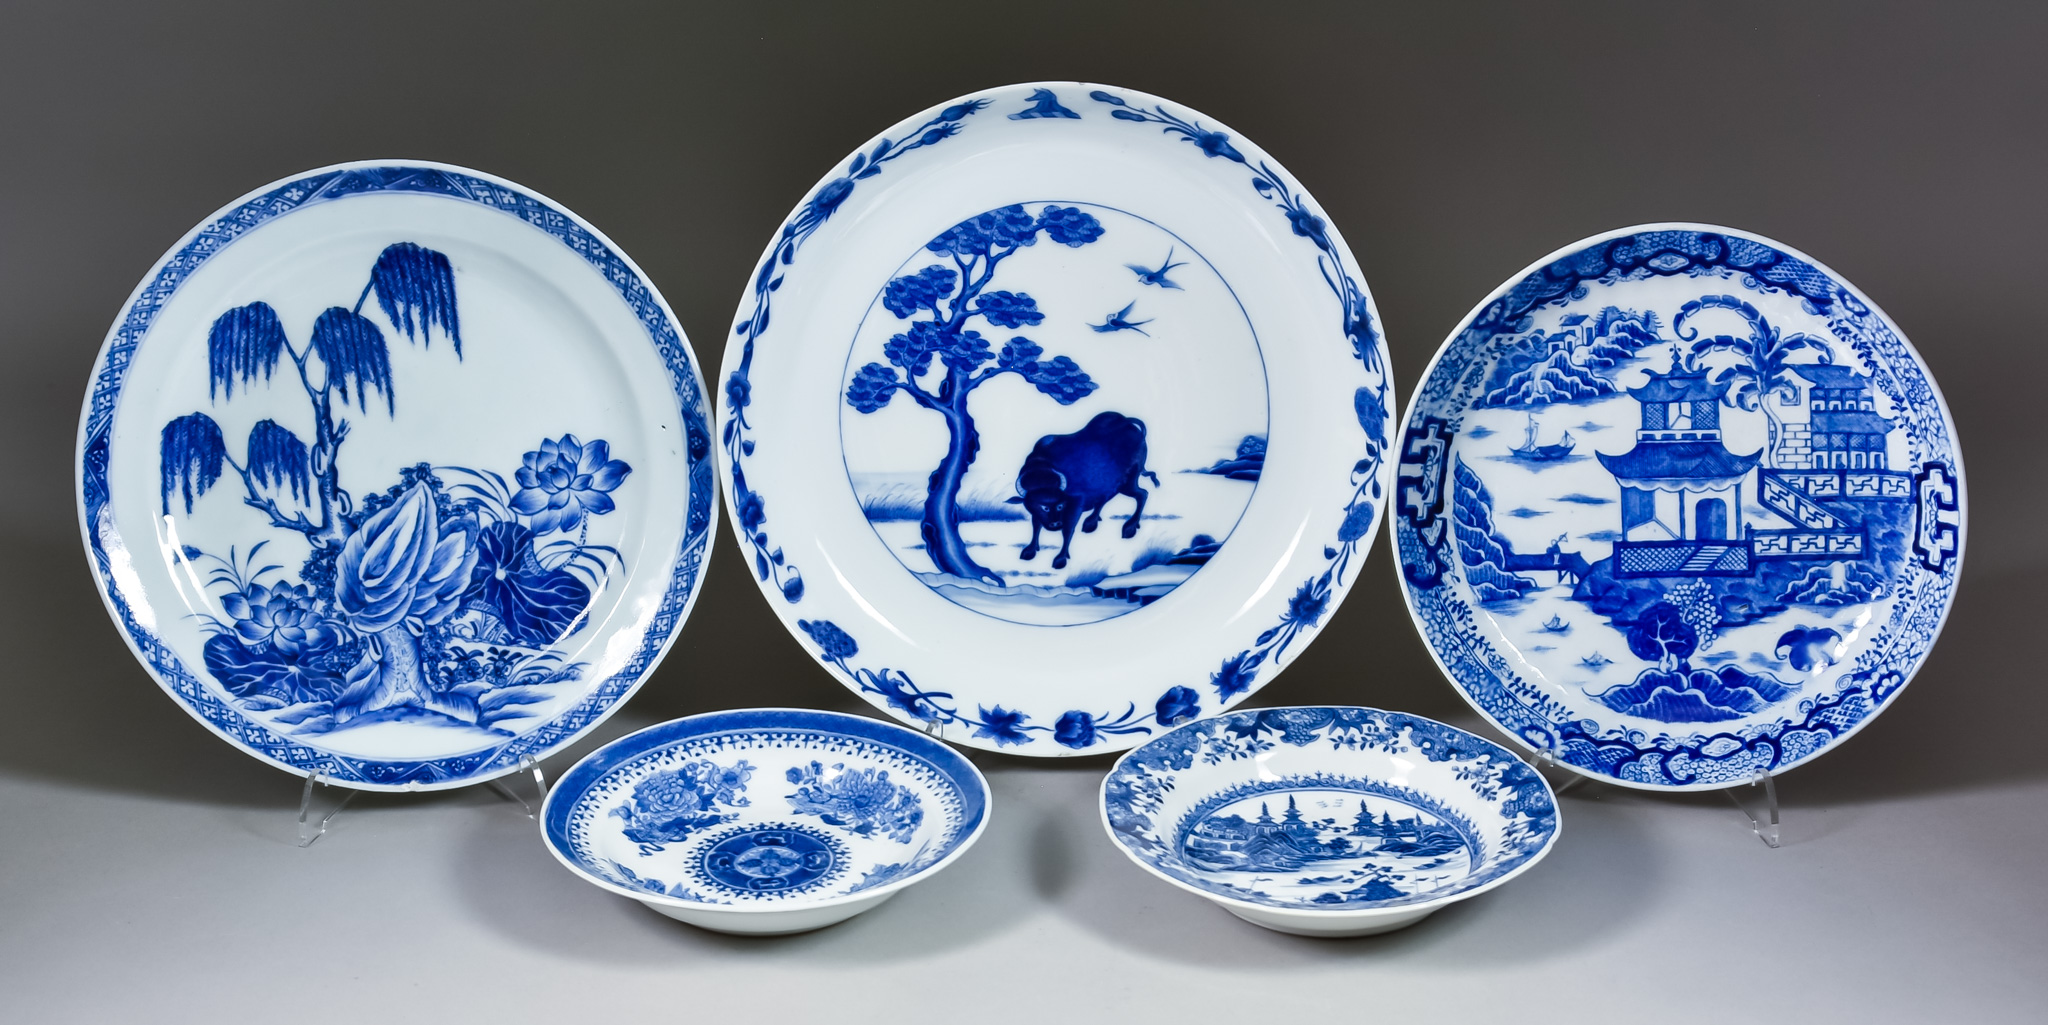 A Chinese Blue and White Porcelain Plate, 19th Century, painted with a landscape with a bull by a